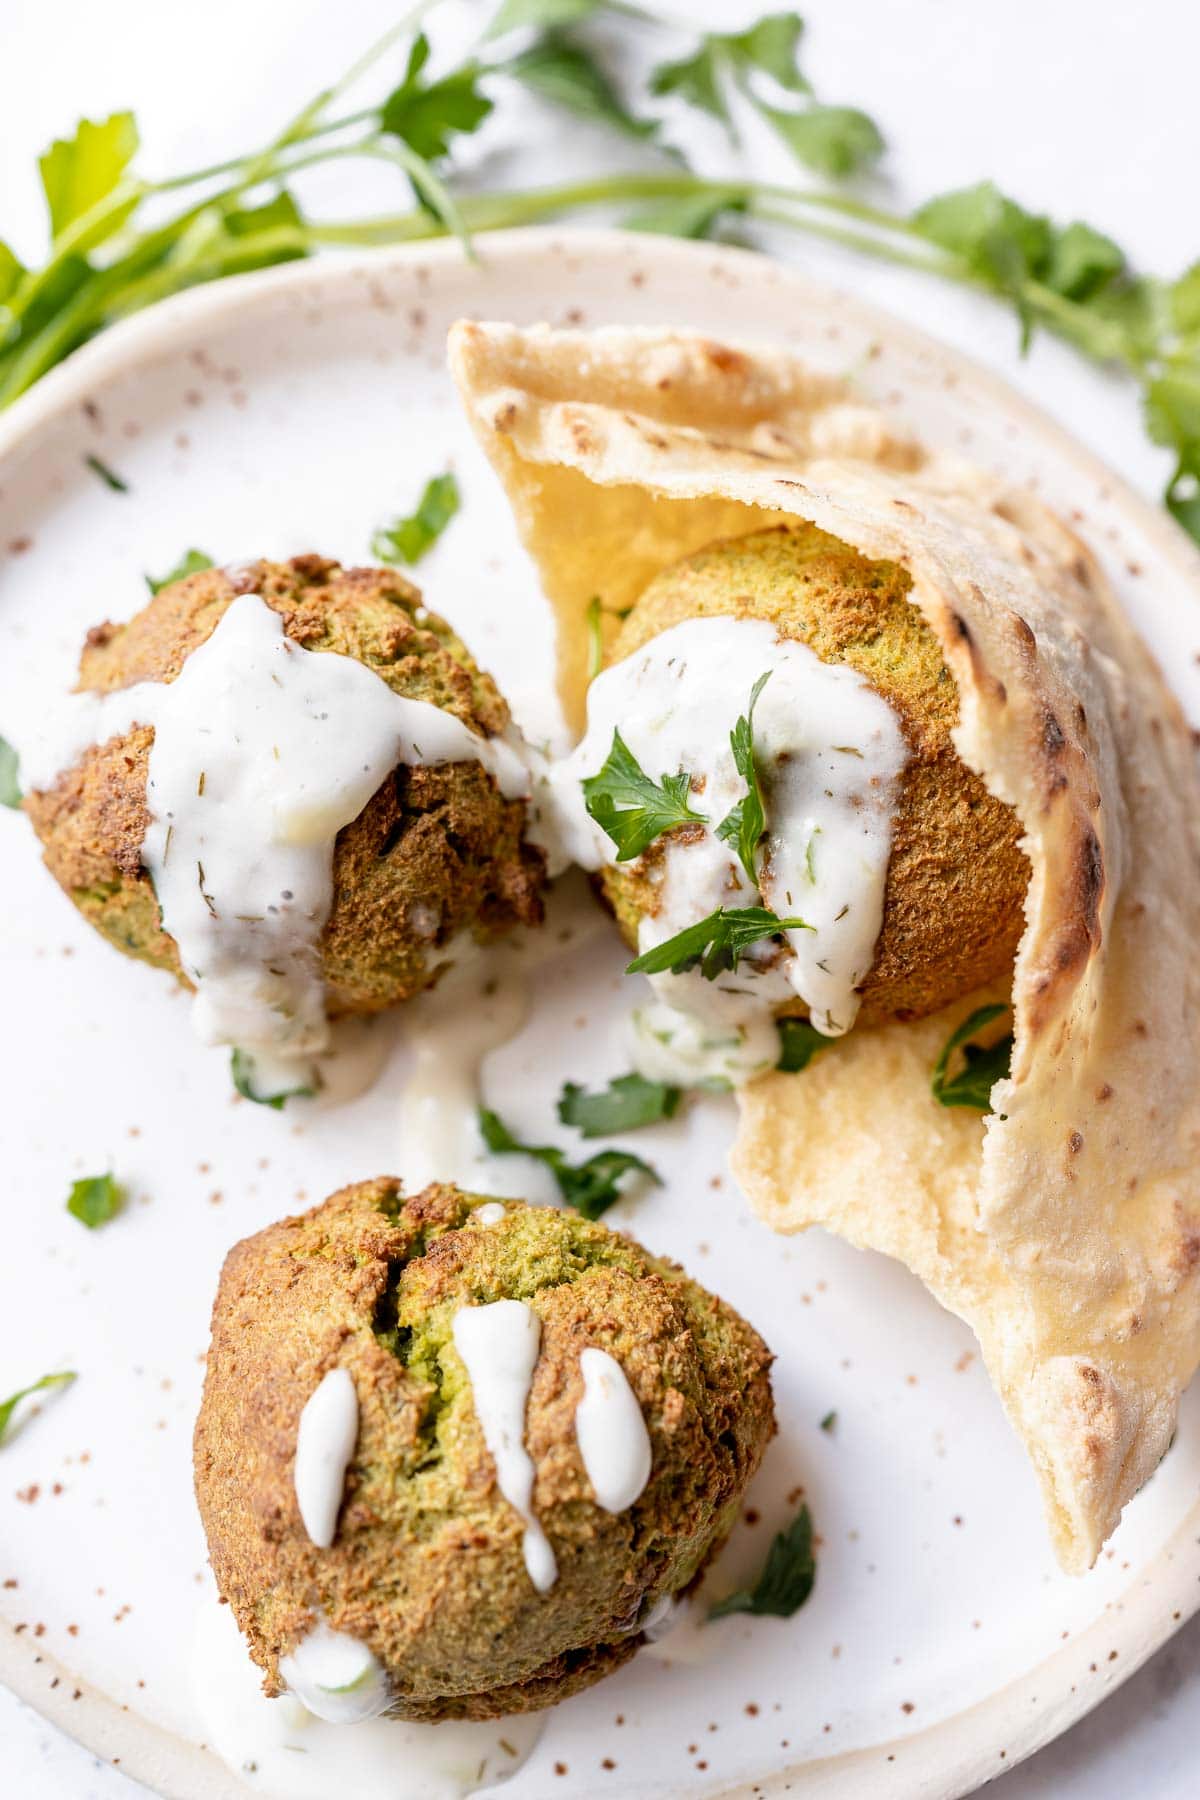 Crispy falafel stuck in white pita bread drizzled with sauce and topped with fresh green herbs.